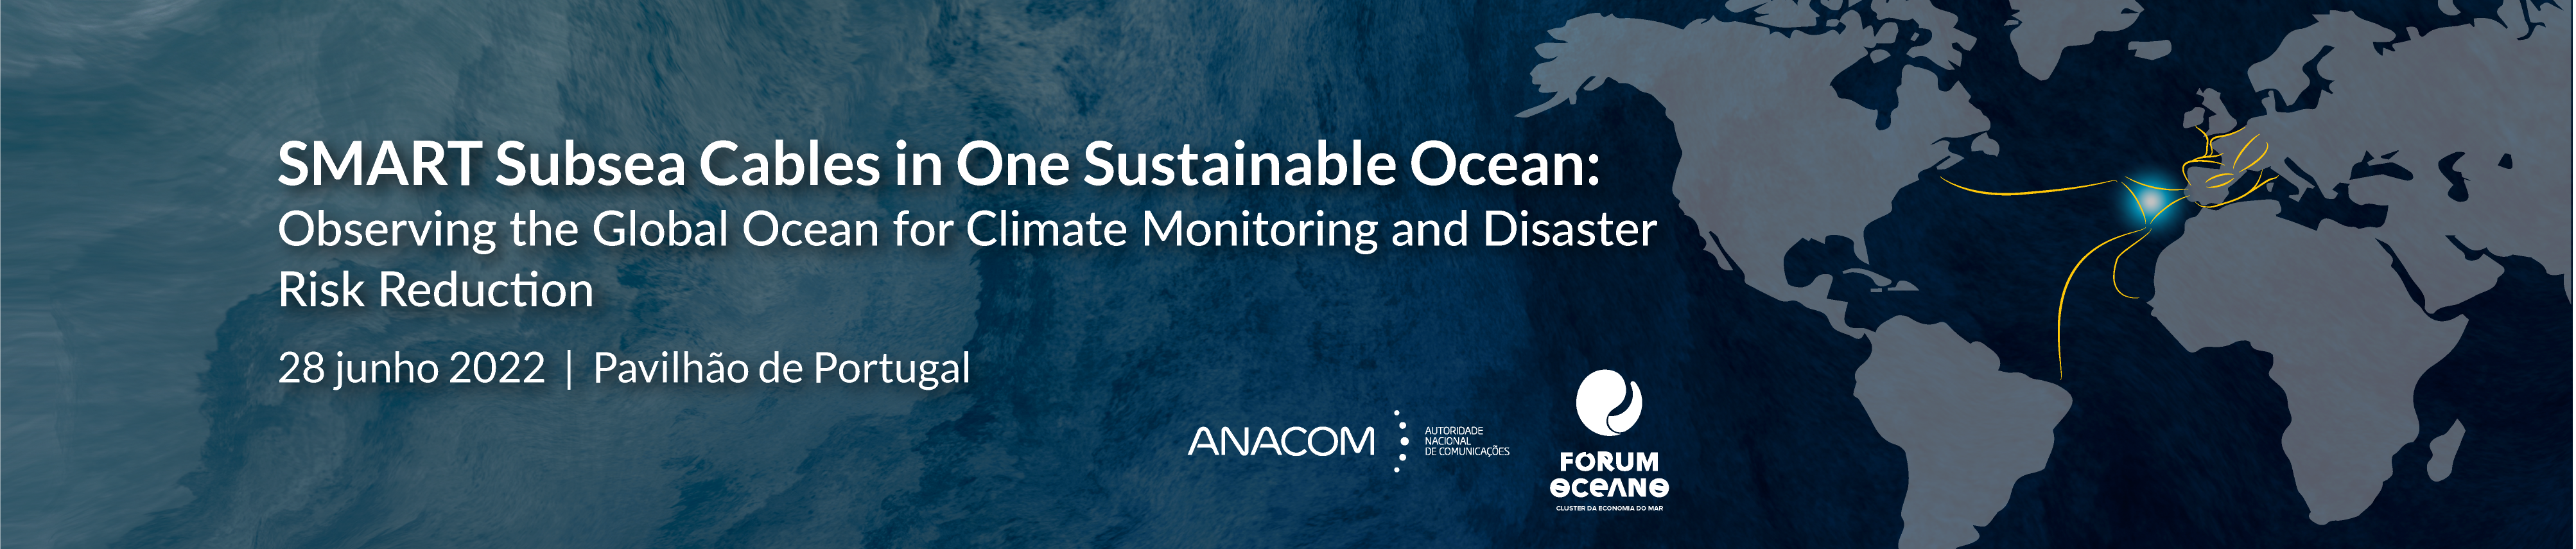 SMART Subsea Cables in One Sustainable Ocean: Observing the Global Ocean for Climate Monitoring and Disaster Risk Reduction